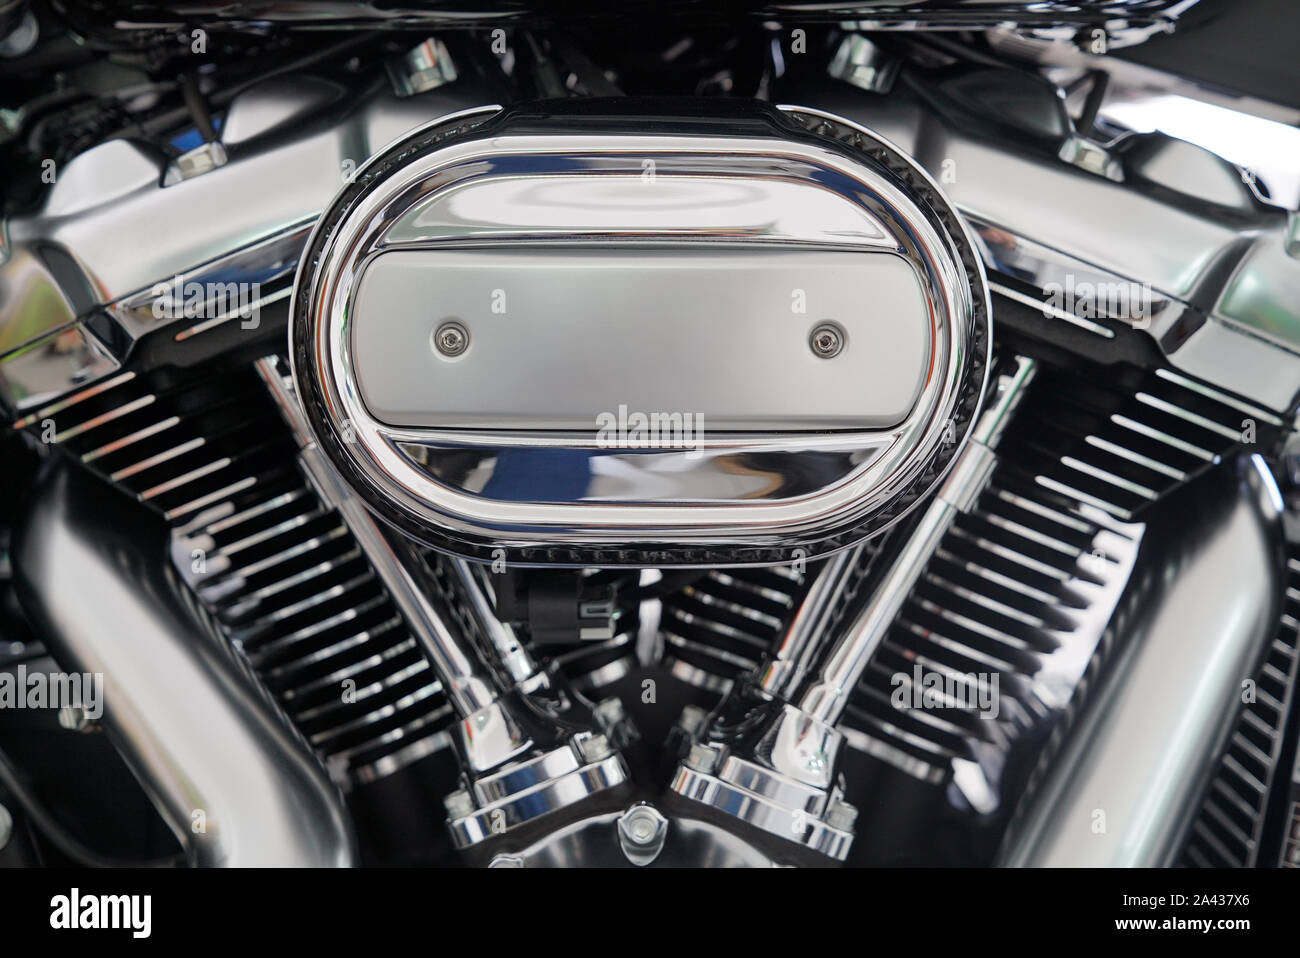 motorcycle engine chrome details close-up shot for background polished silver reflection chopper american bike cylinder exhaust pipe and pistons Stock Photo